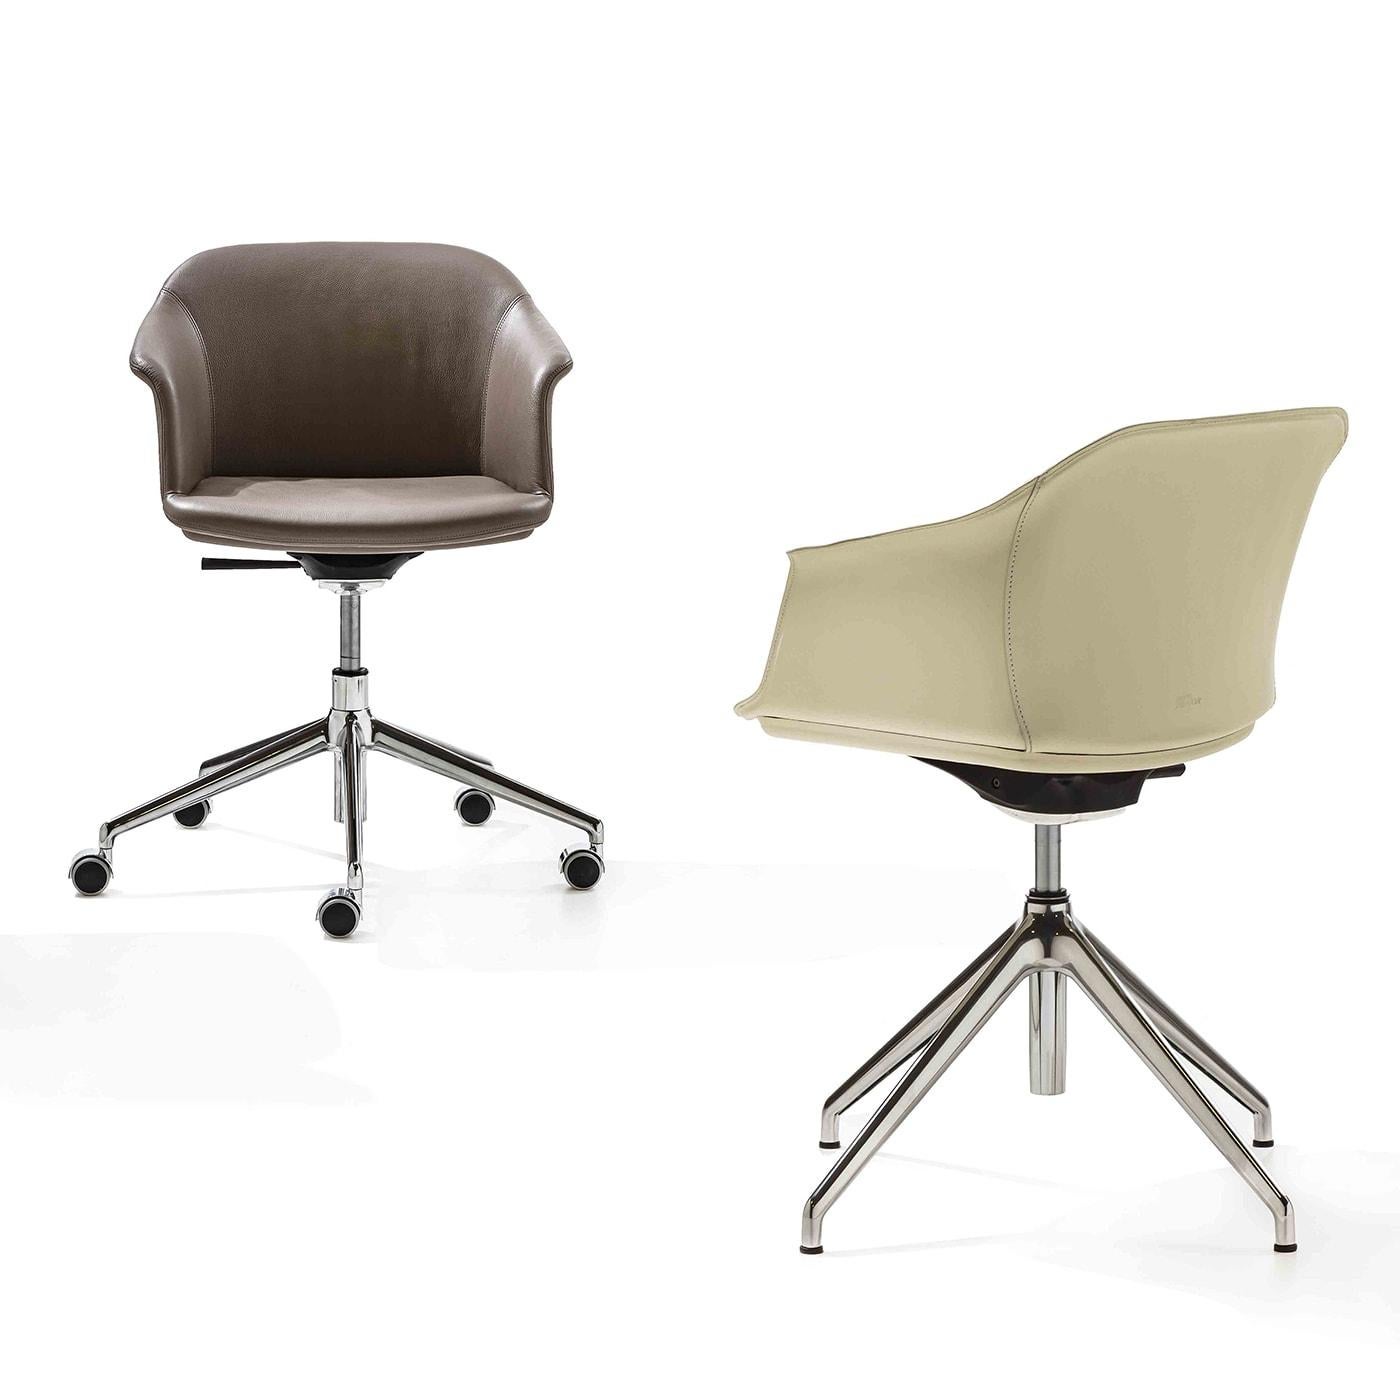 Eva swivel chair has a rigid polyurethane shell in white leather with a thin seat cushion integrated and four star base with height adjustment in chrome.
• Seat Height (cm): 46
• Seat Height (in): 18.11
• Arm Height (cm): 63
• Arm Height (in):